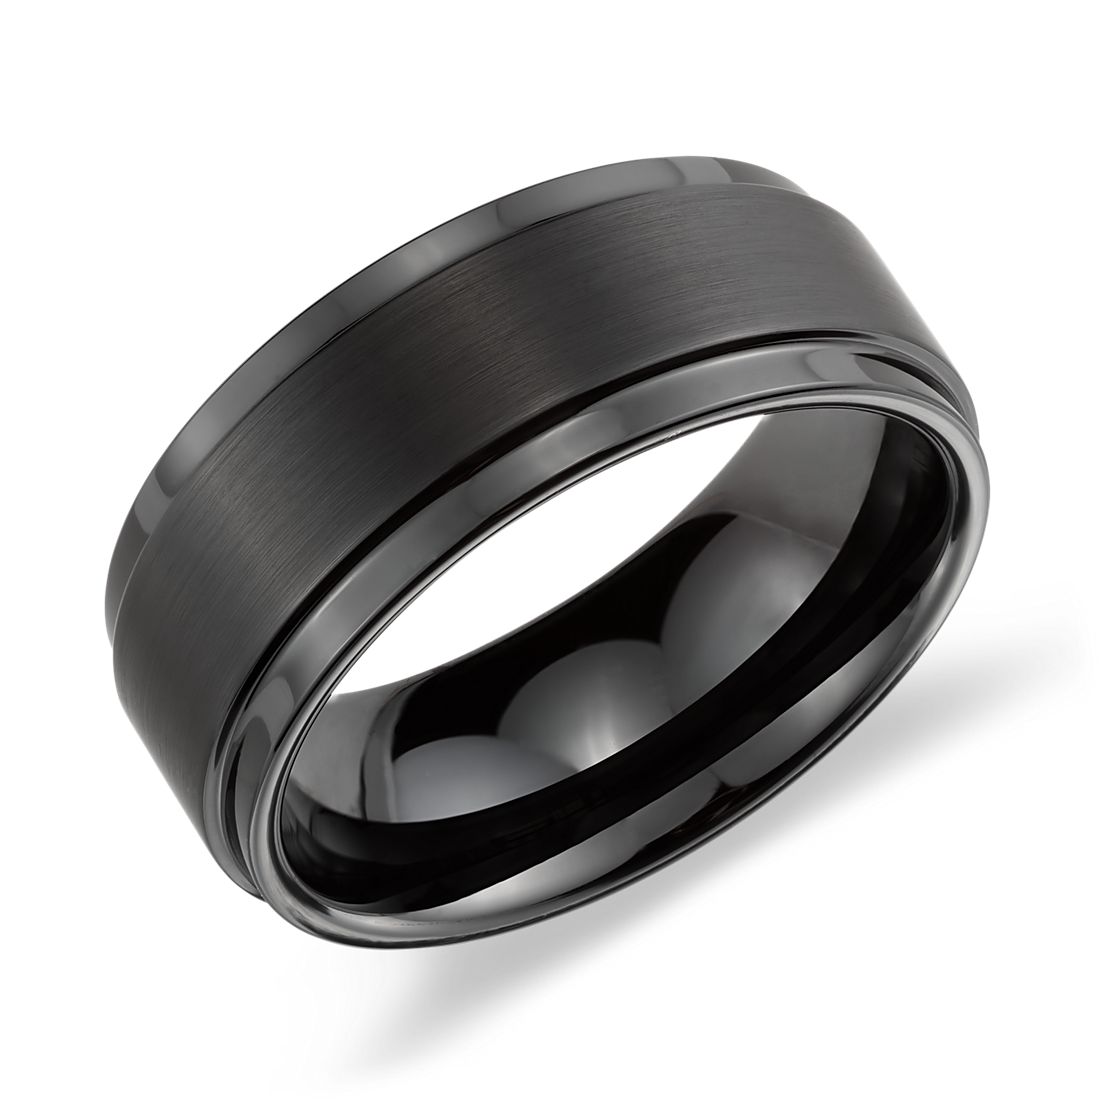 9MM Black Two Tone Tungsten Carbide Mens Brushed Wedding Band Ring Comfort Fit Sizes 8 to 13